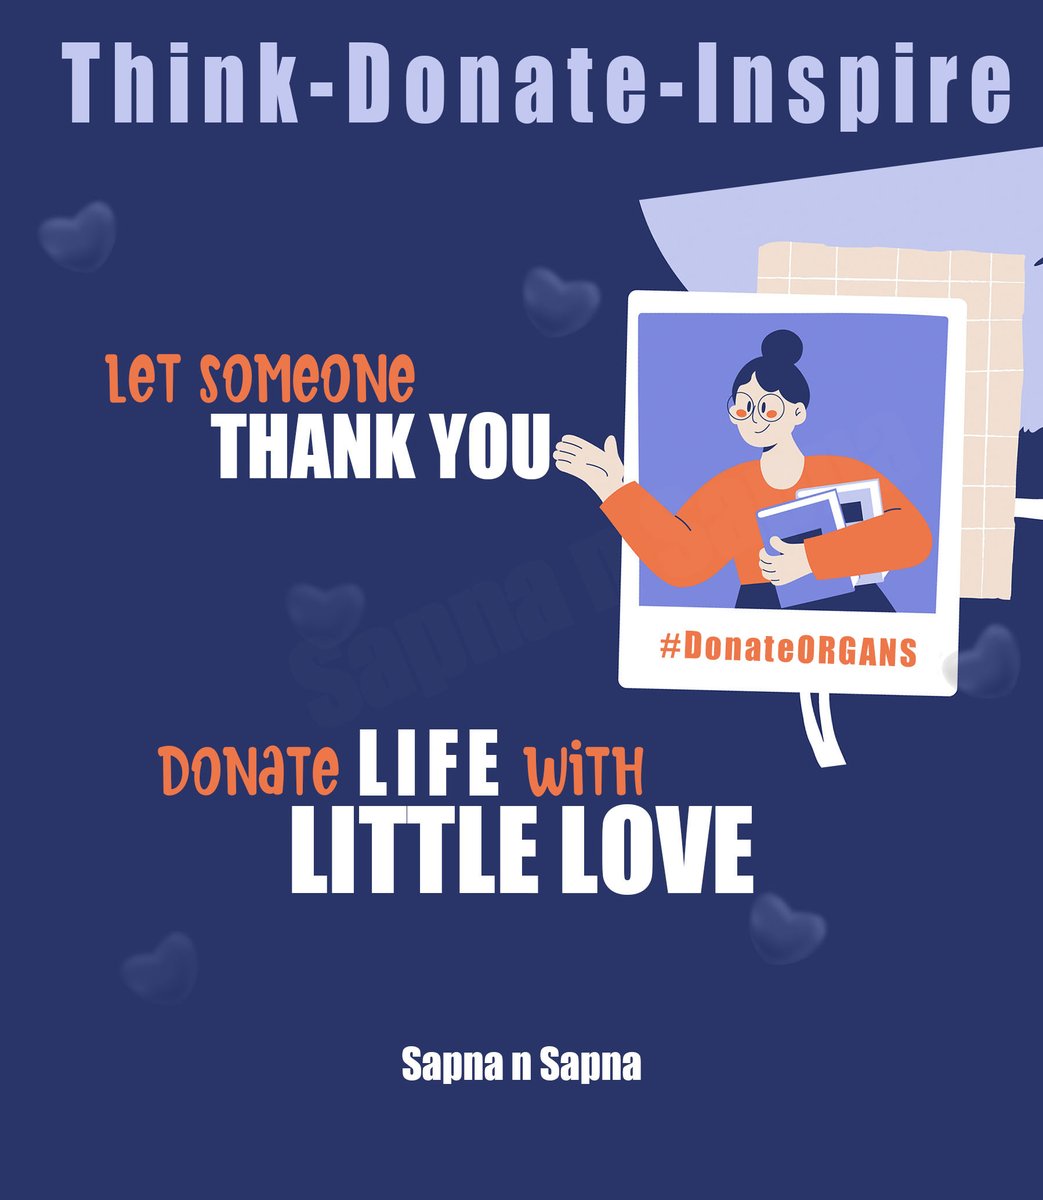 LET SOMEONE THANK YOU - THINK DONATE INSPIRE - BECOME AN ORGAN DONOR
अंगदान है महादान- SAVE 9 LIVES and ENHANCE upto 75 LIVES -Donate Organs- ORGAN DONATION AWARENESS ❤️🙌🇮🇳

#DonateOrganSaveLife #organdonationawarenesss #organdonor #donateblood #donateeyes